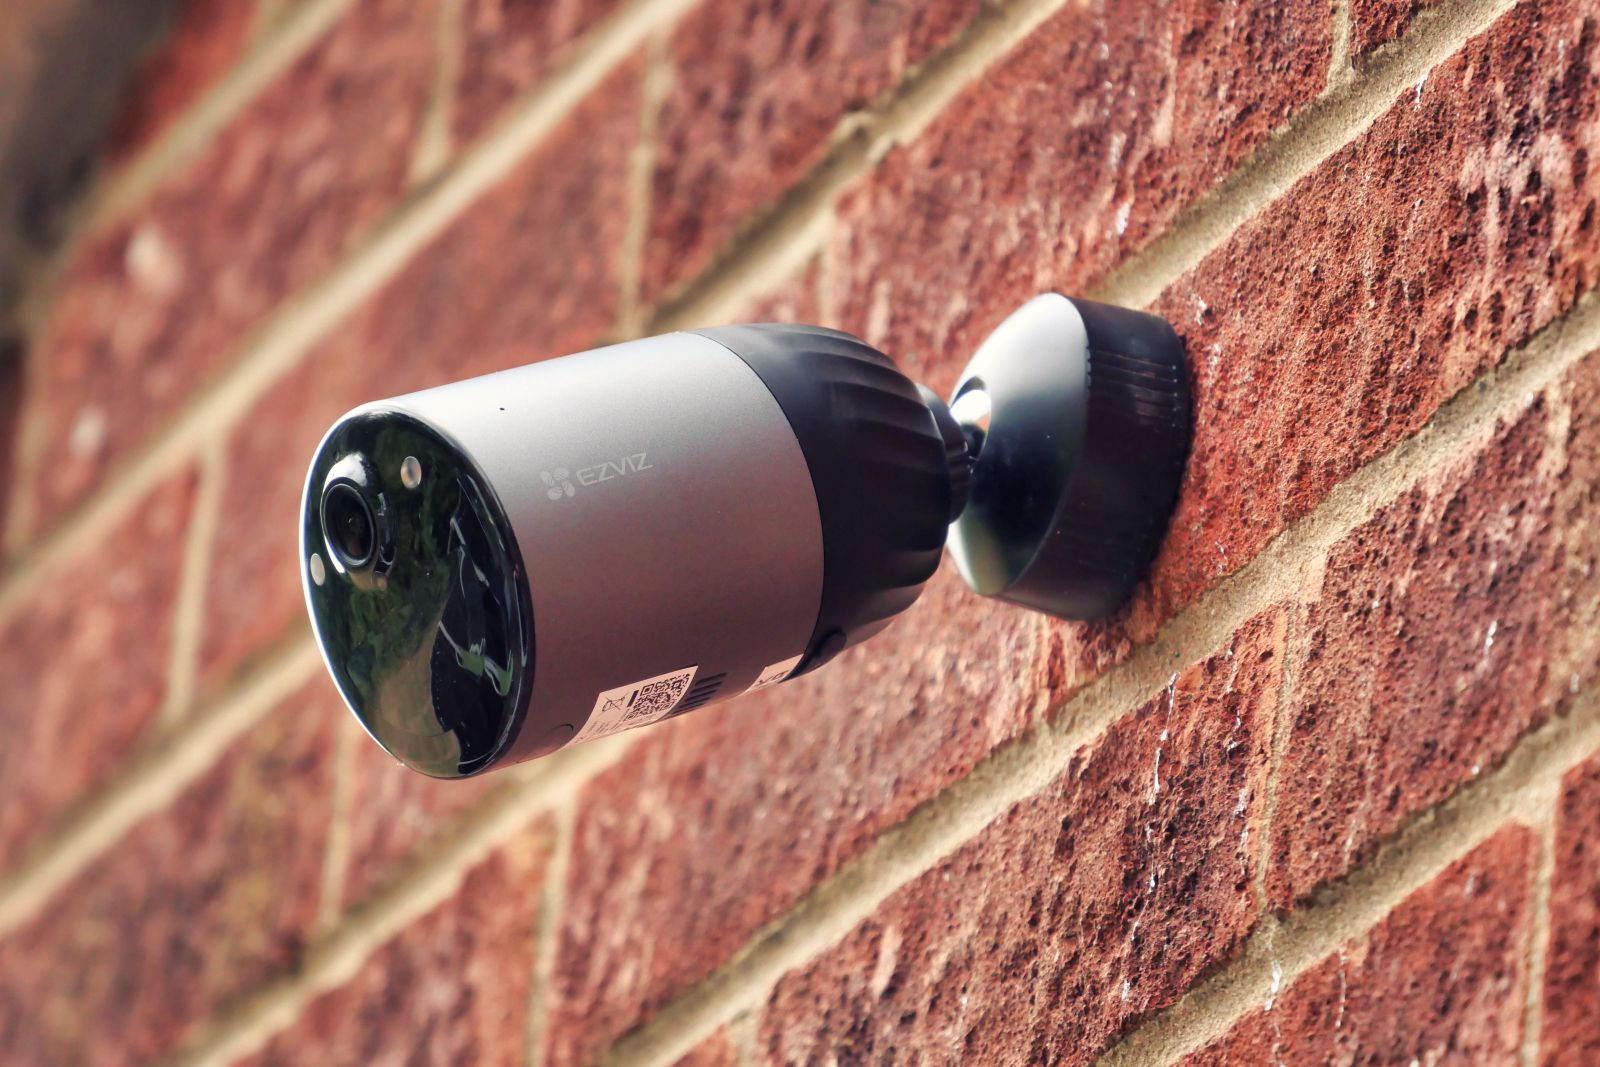 Best security camera deals: Stay protected for less